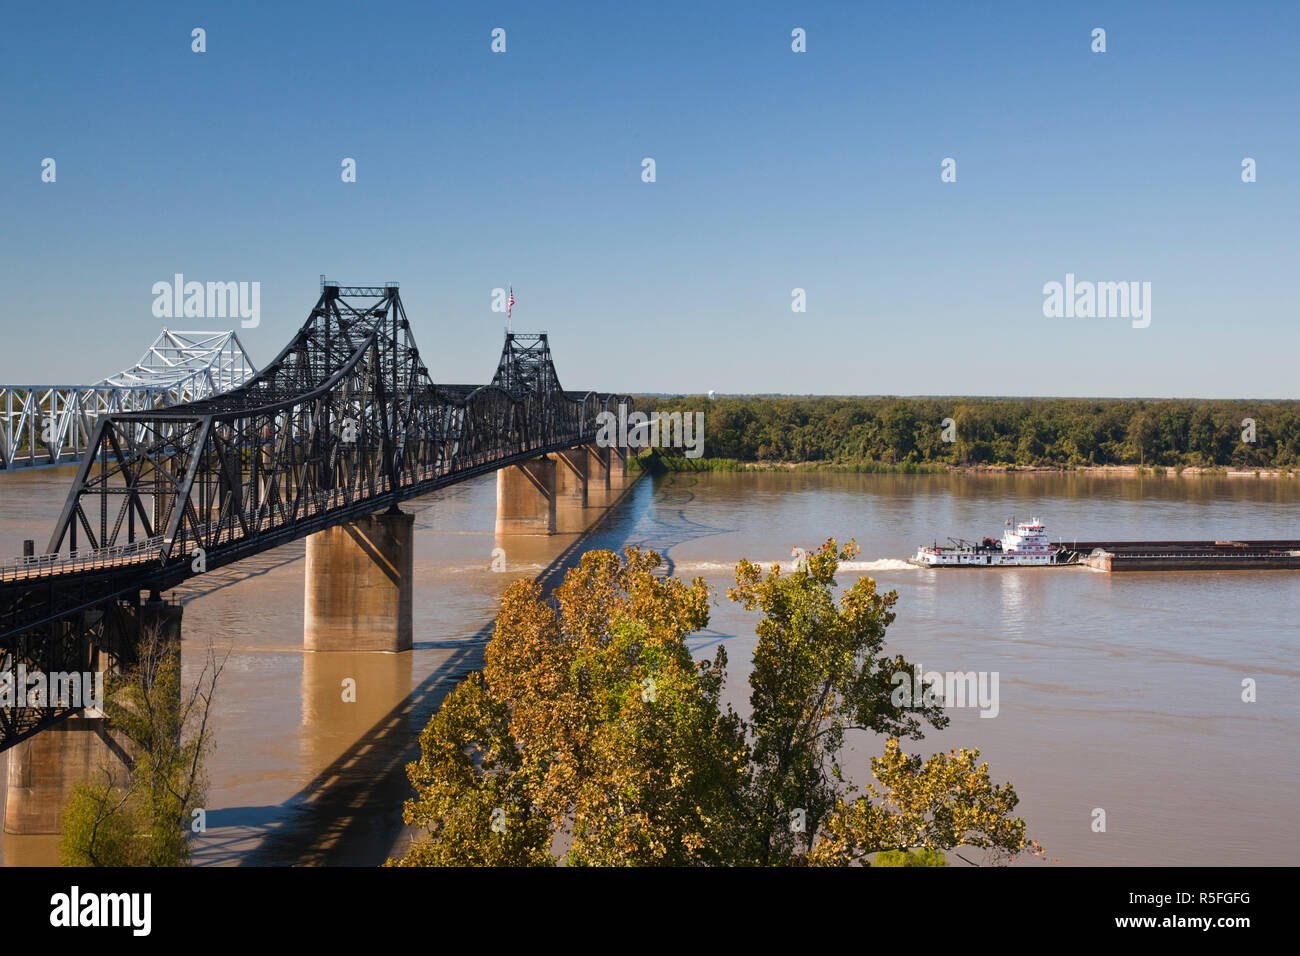 USA, Mississippi, Vicksburg, I-20 Highway and US-80 bridges across the Mississippi River with river barge traffic Stock Photo